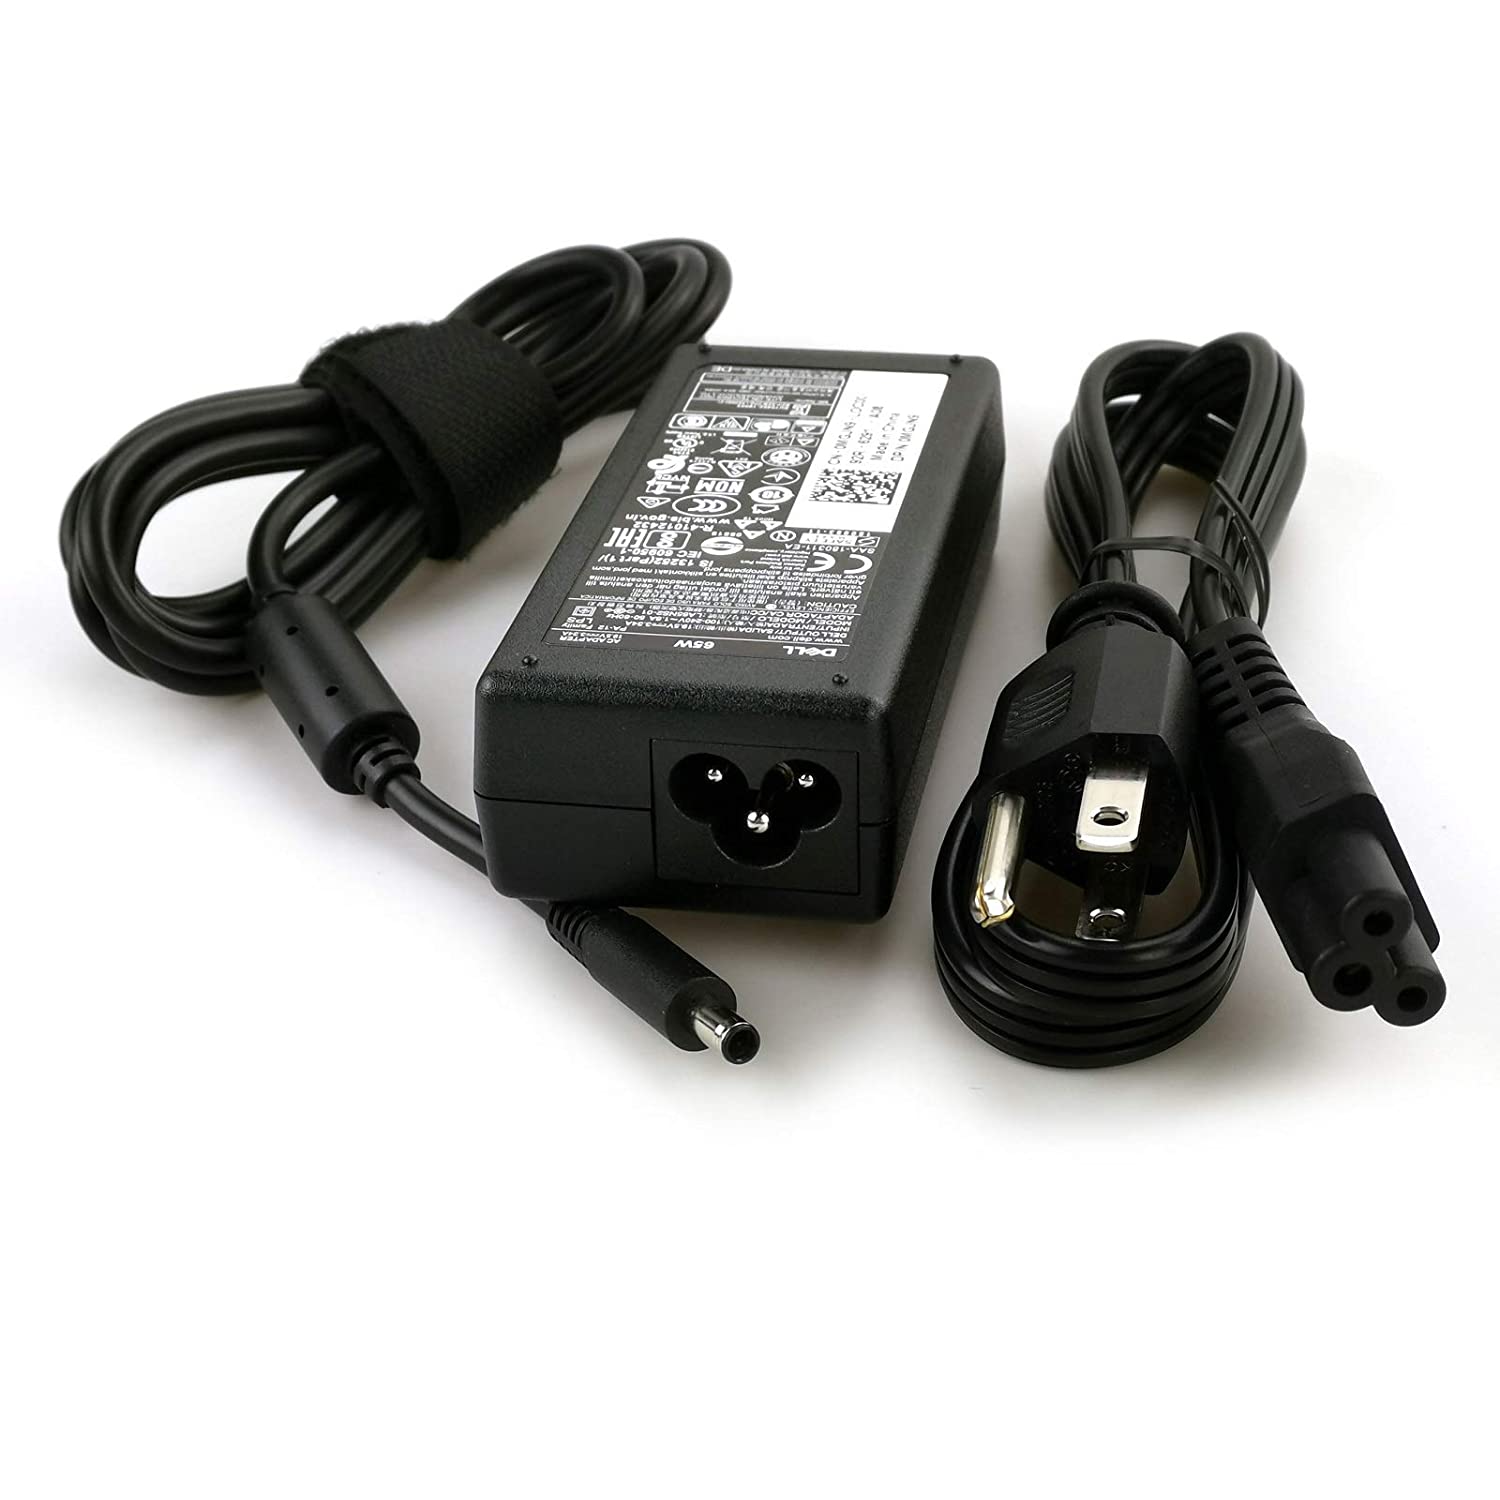 New Dell Original Inspiron Laptop Charger 65W watt 4.5mm tip AC Power Adapter(Power Supply) with Power Cord for Inspiron 13 14 15,3000 5000 7000 Series,5558 5755 3147 7348-2in1 5555 5559,0G6j41 0MGJN - image 5 of 6